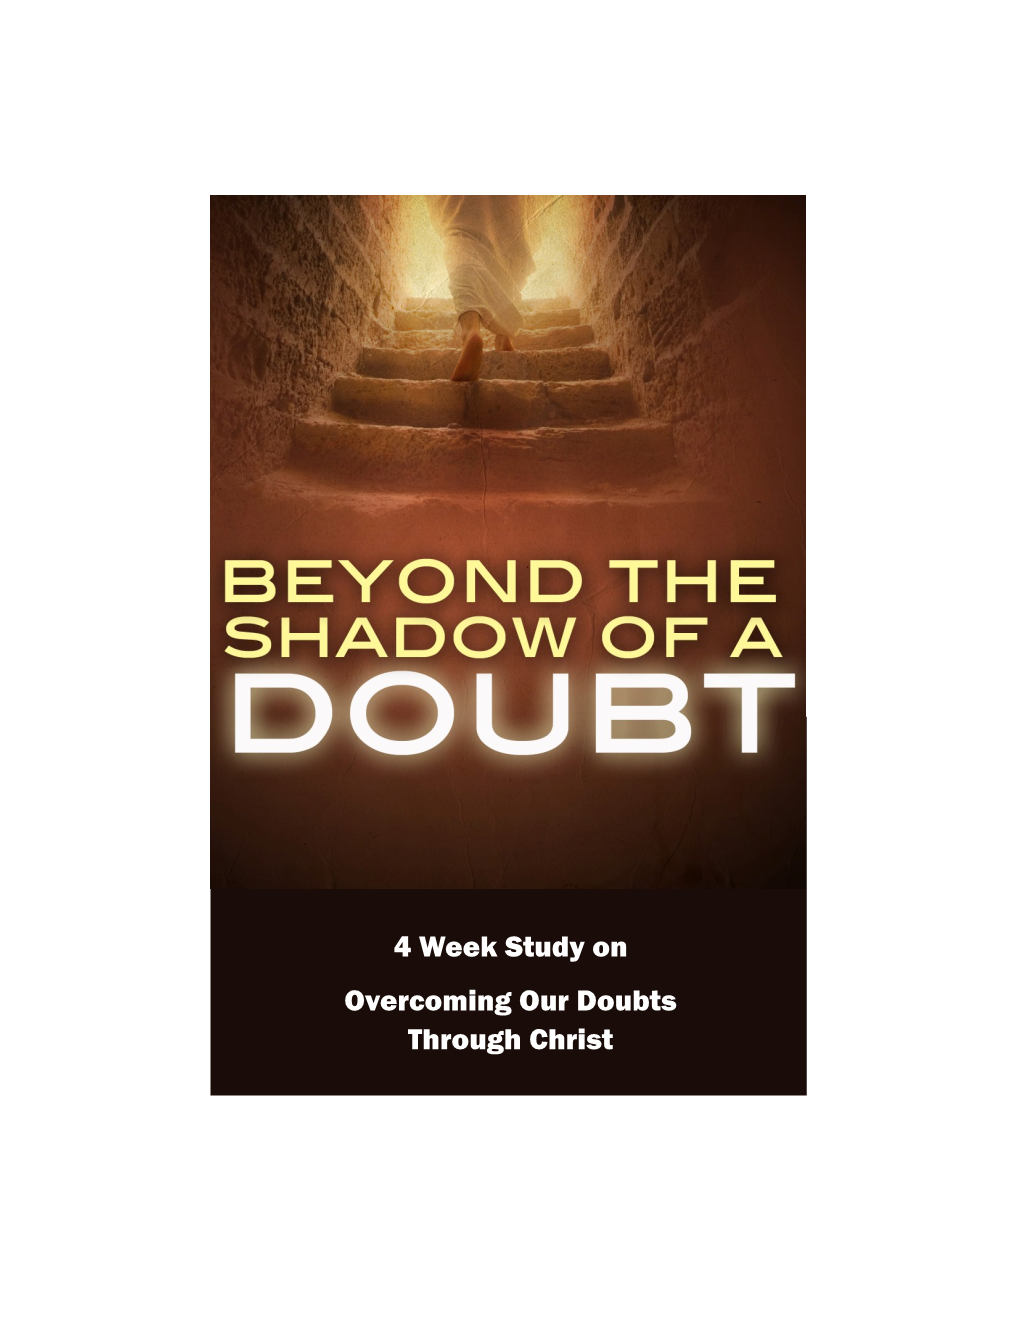 4 Week Study on Overcoming Our Doubts Through Christ Beyond the Shadow of a Doubt—Study Guide